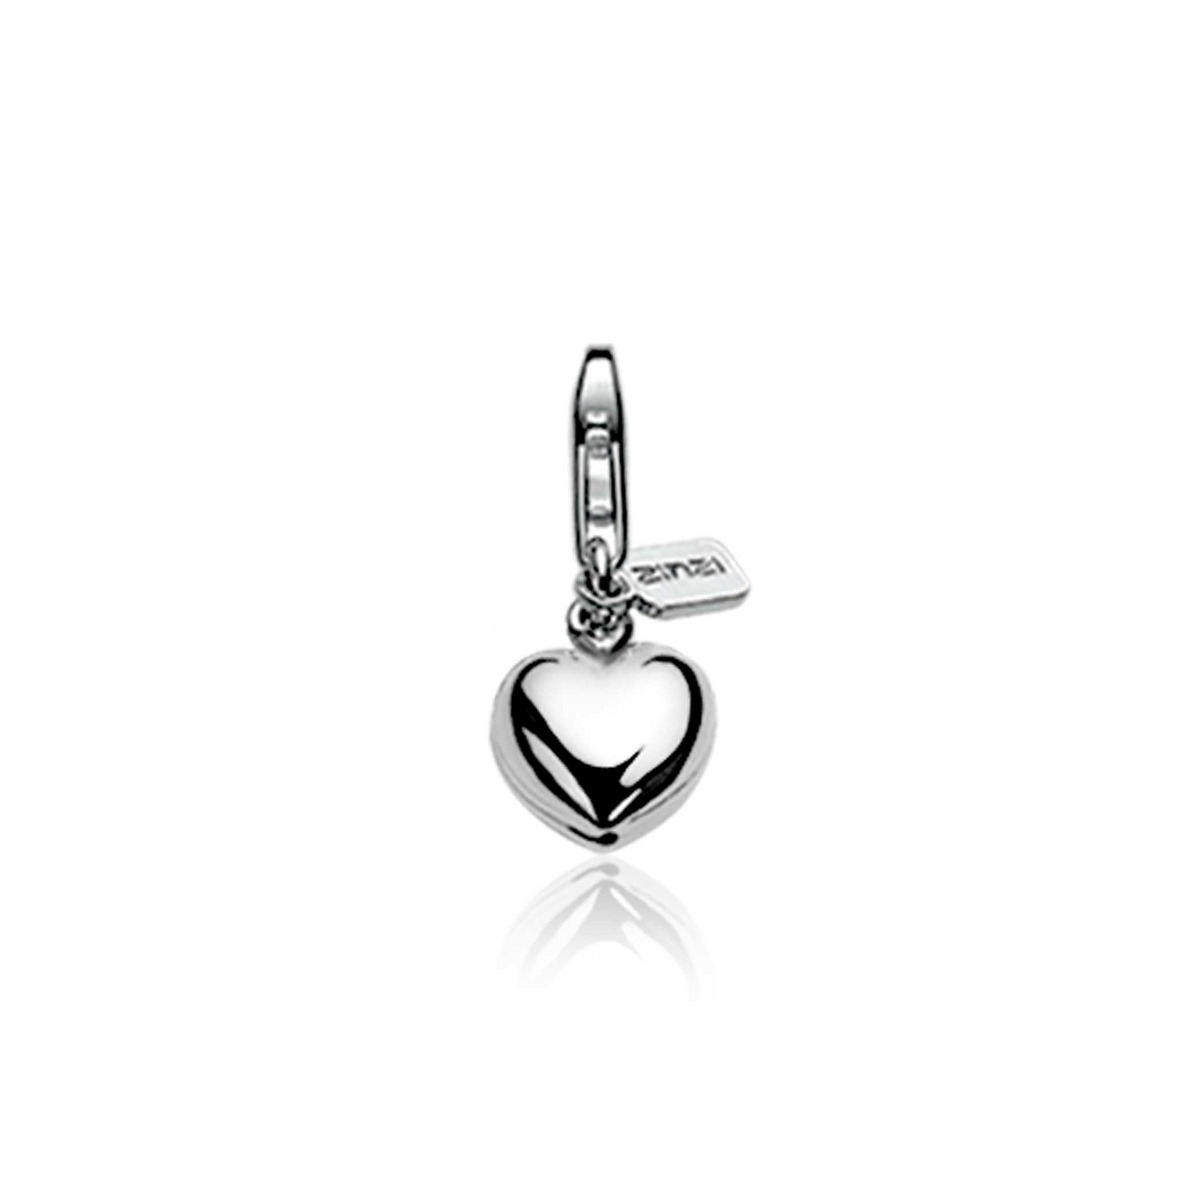 ZINZI Sterling Silver Charm Heart CHARMS1